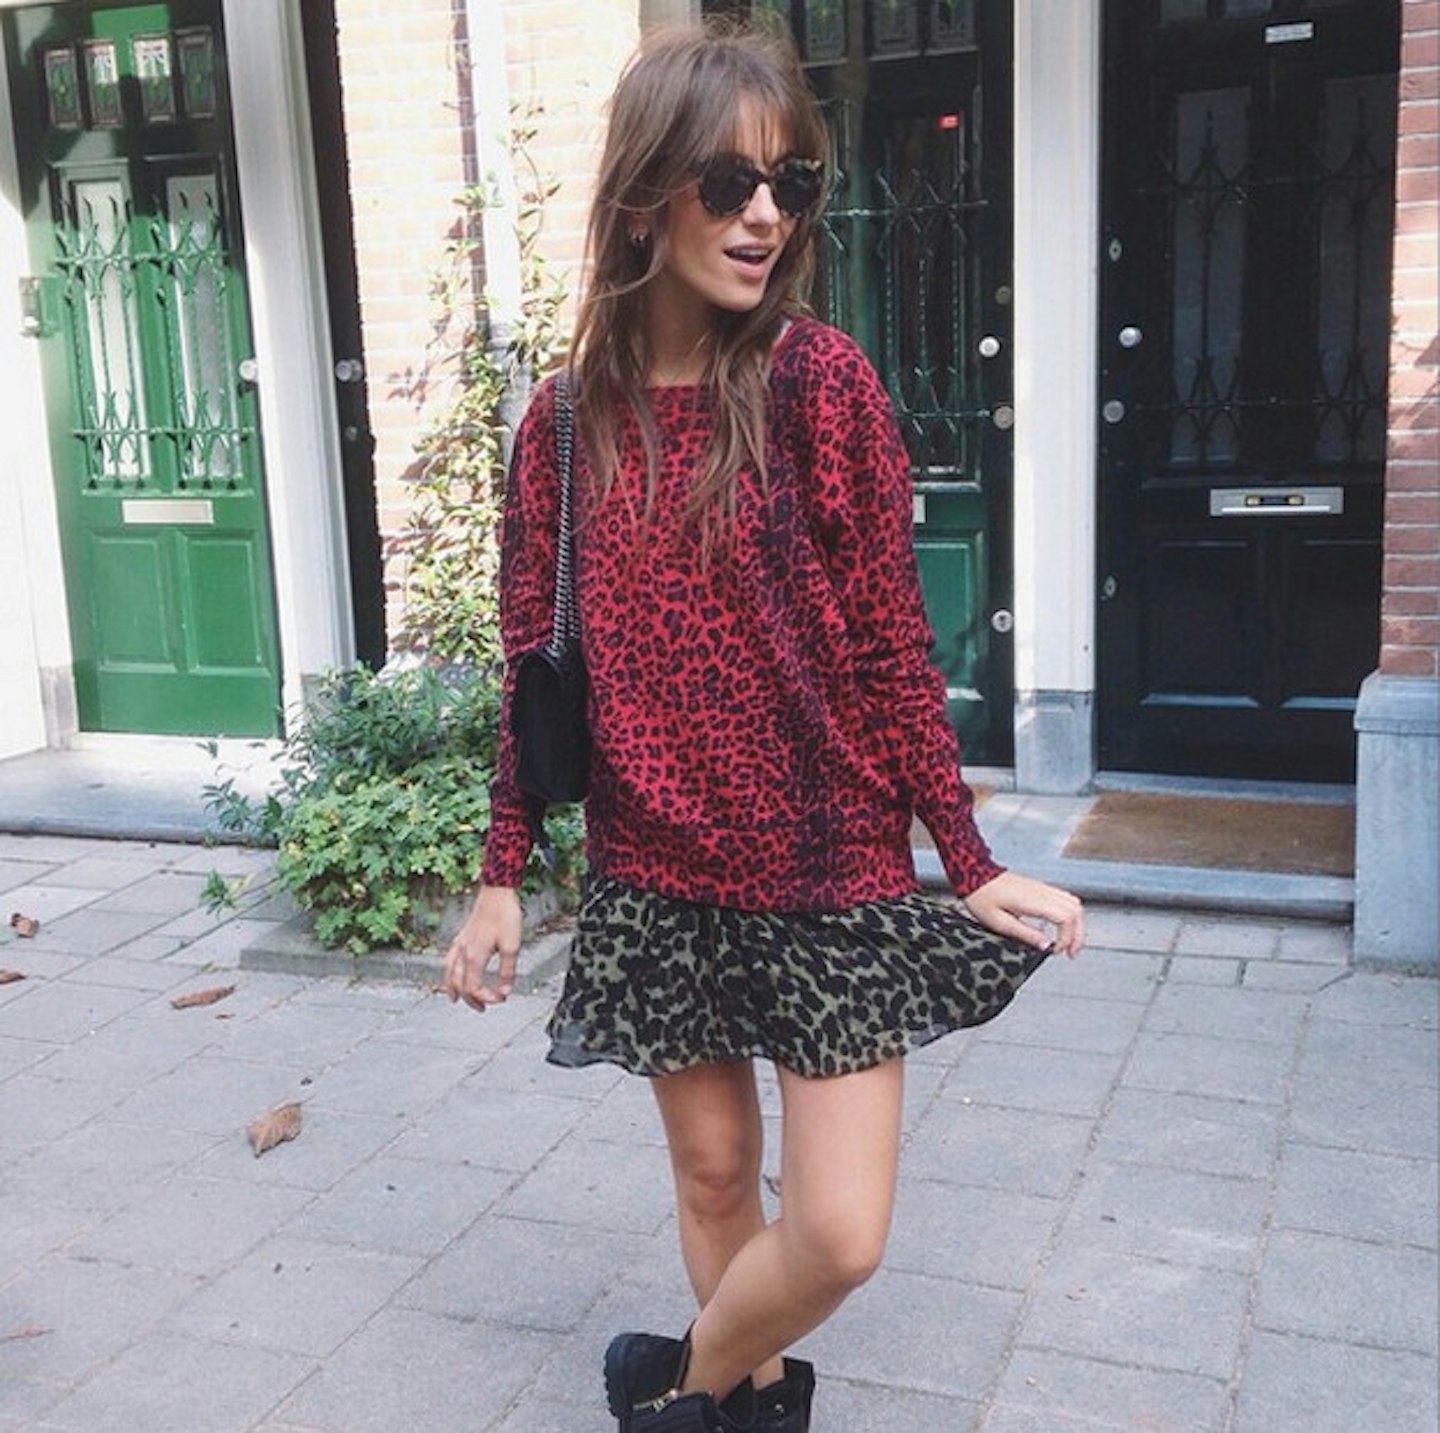 Let's Dissect How Blogger Lizzy Van Der Ligt Wears Leopard Print And ...